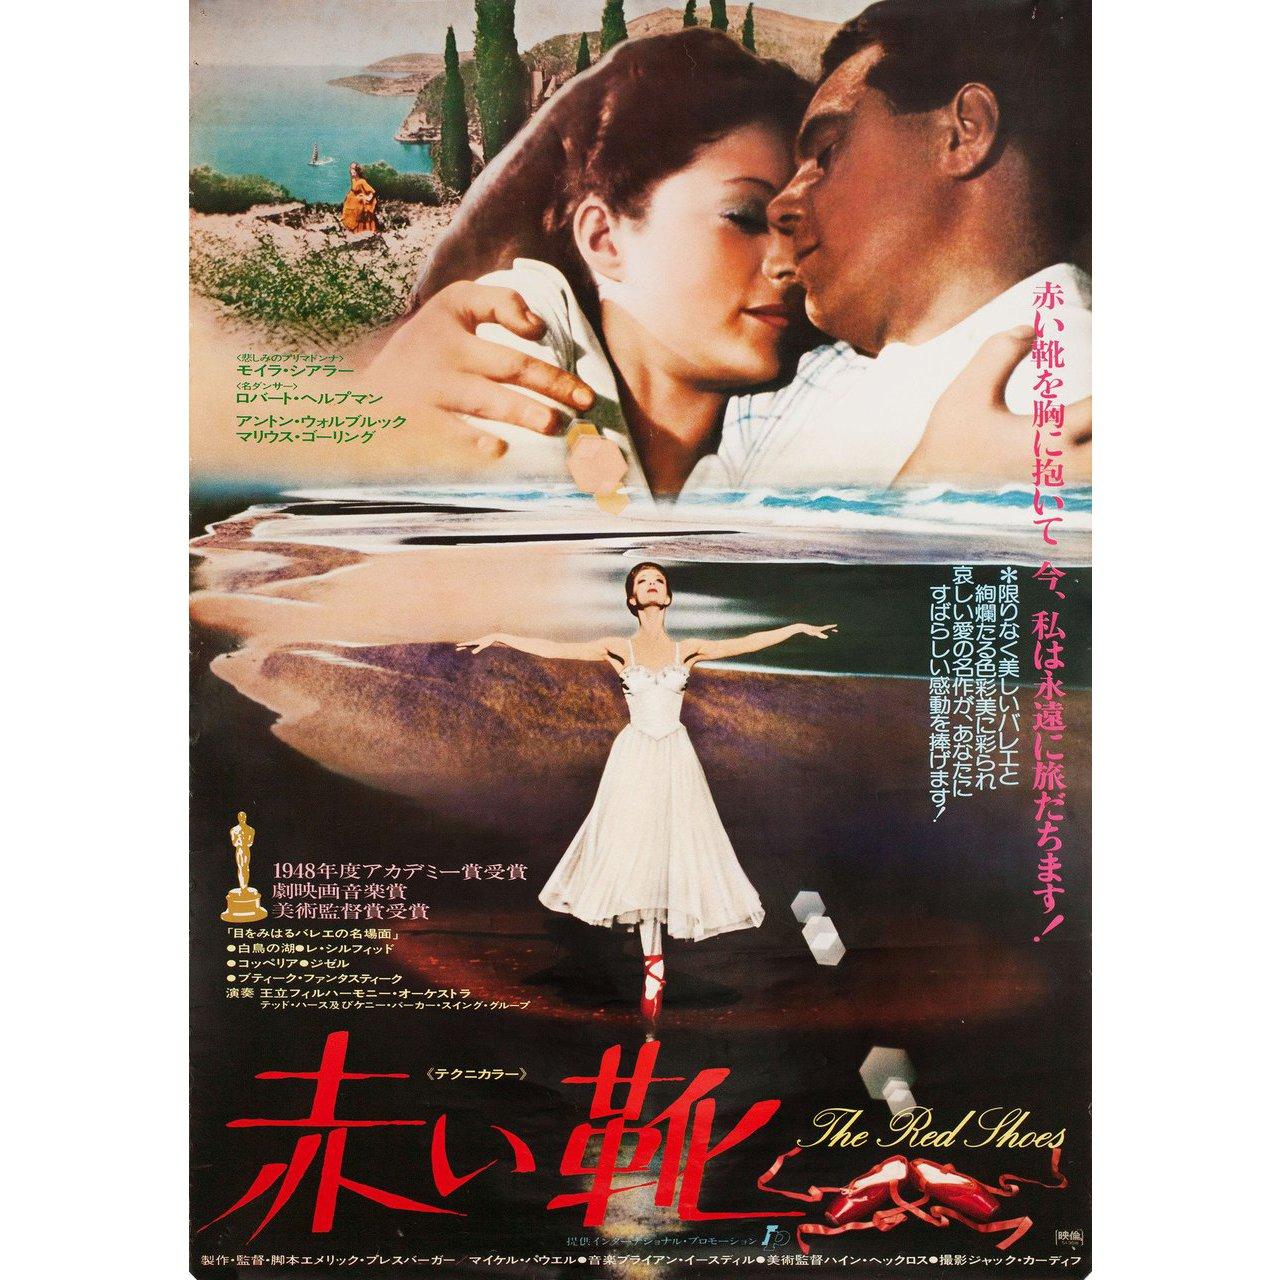 Original 1976 re-release Japanese B2 poster for the 1948 film The Red Shoes directed by Michael Powell / Emeric Pressburger with Marius Goring / Jean Short / Gordon Littmann / Julia Lang. Very Good-Fine condition, rolled. Please note: the size is